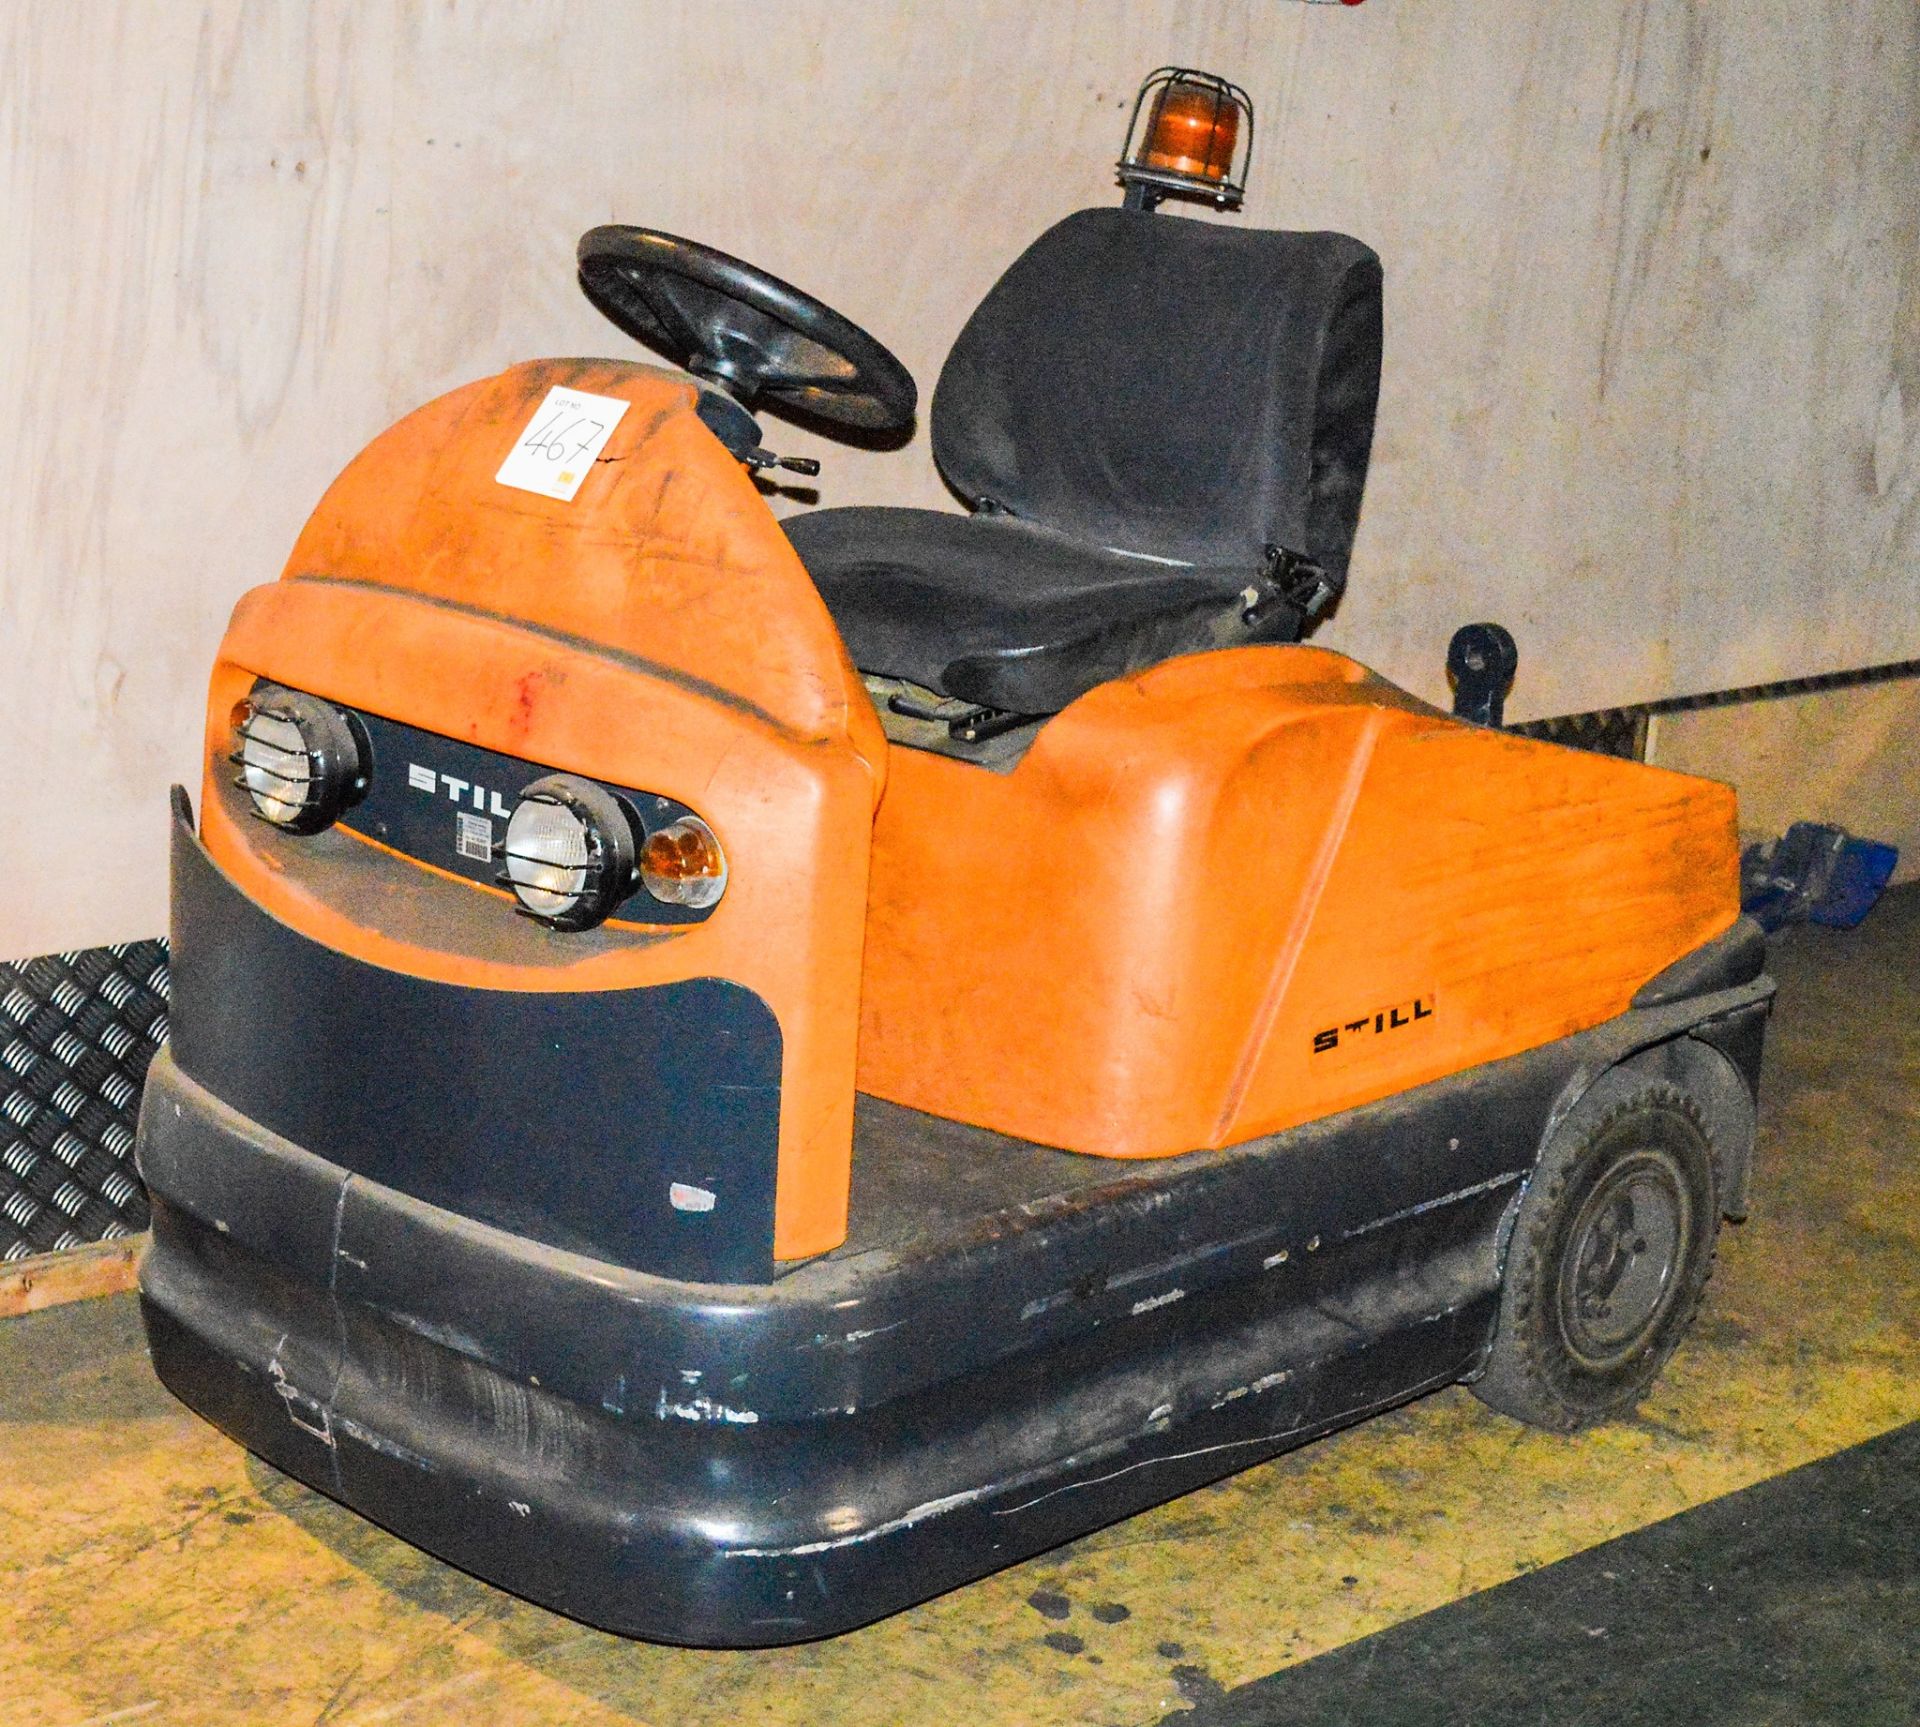 Stihl battery electric factory tug c/w charger